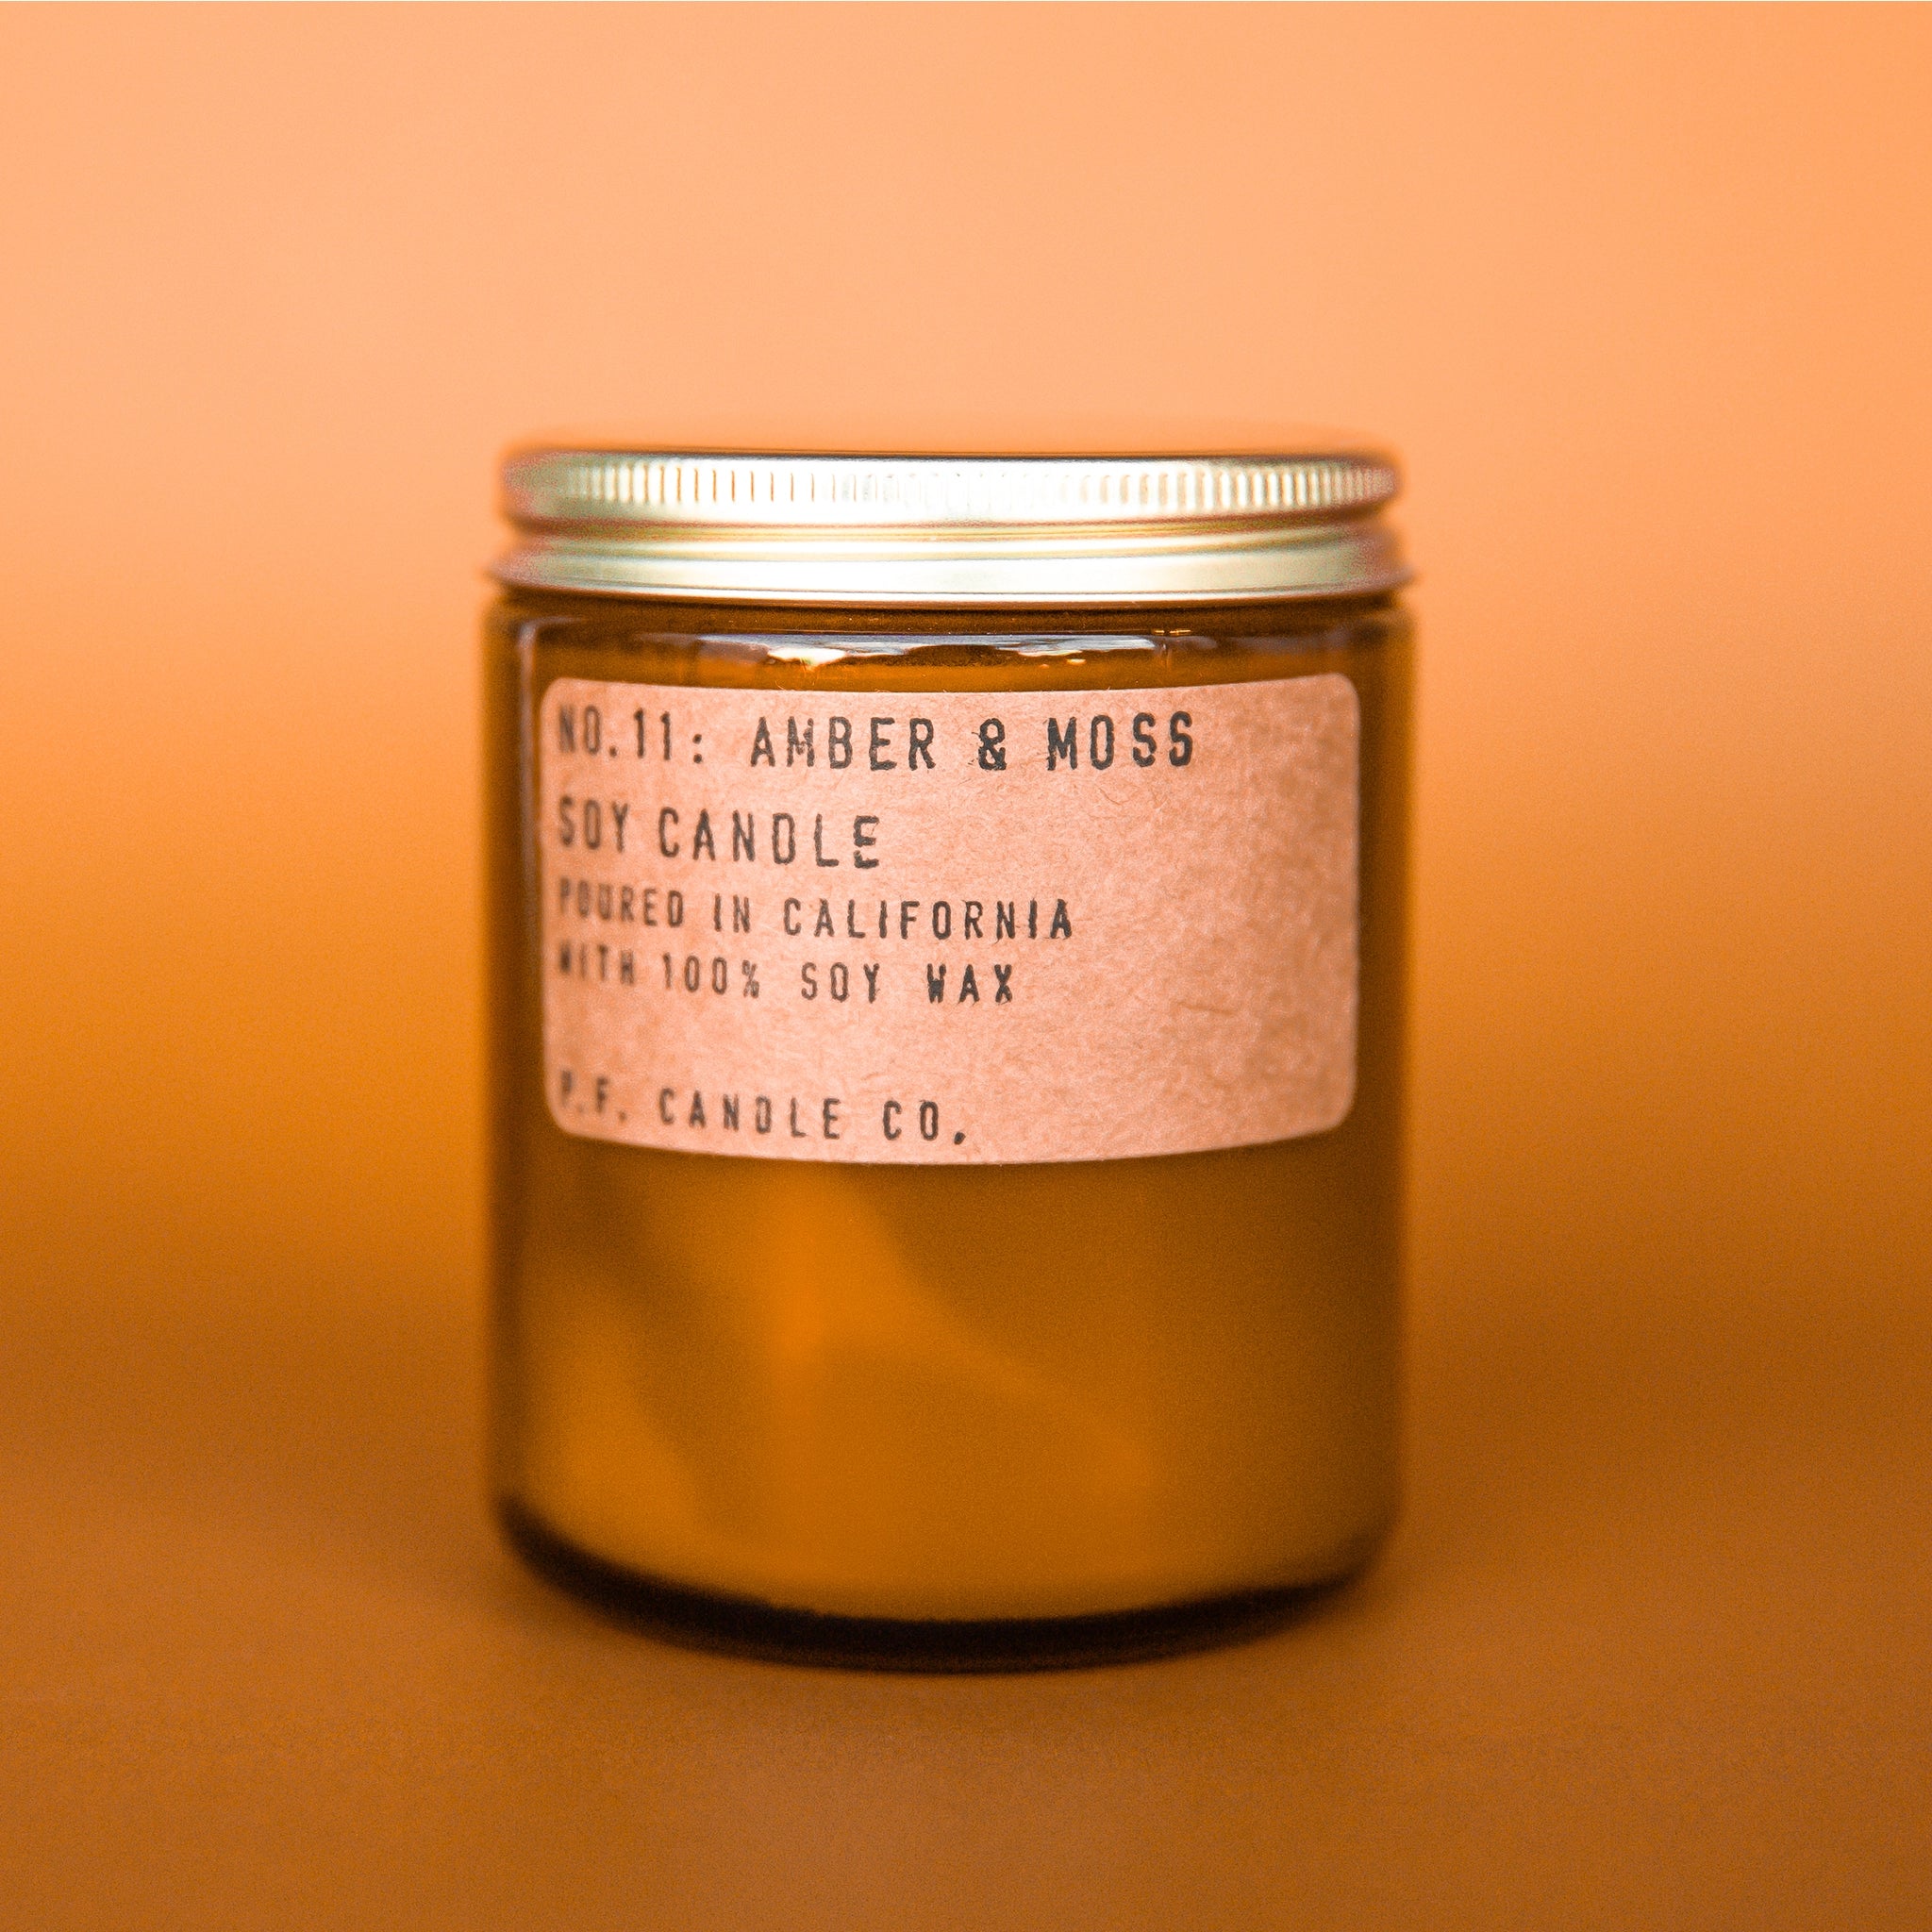 On an orange background is an amber glass jar candle with a kraft brown label and a gold lid. 